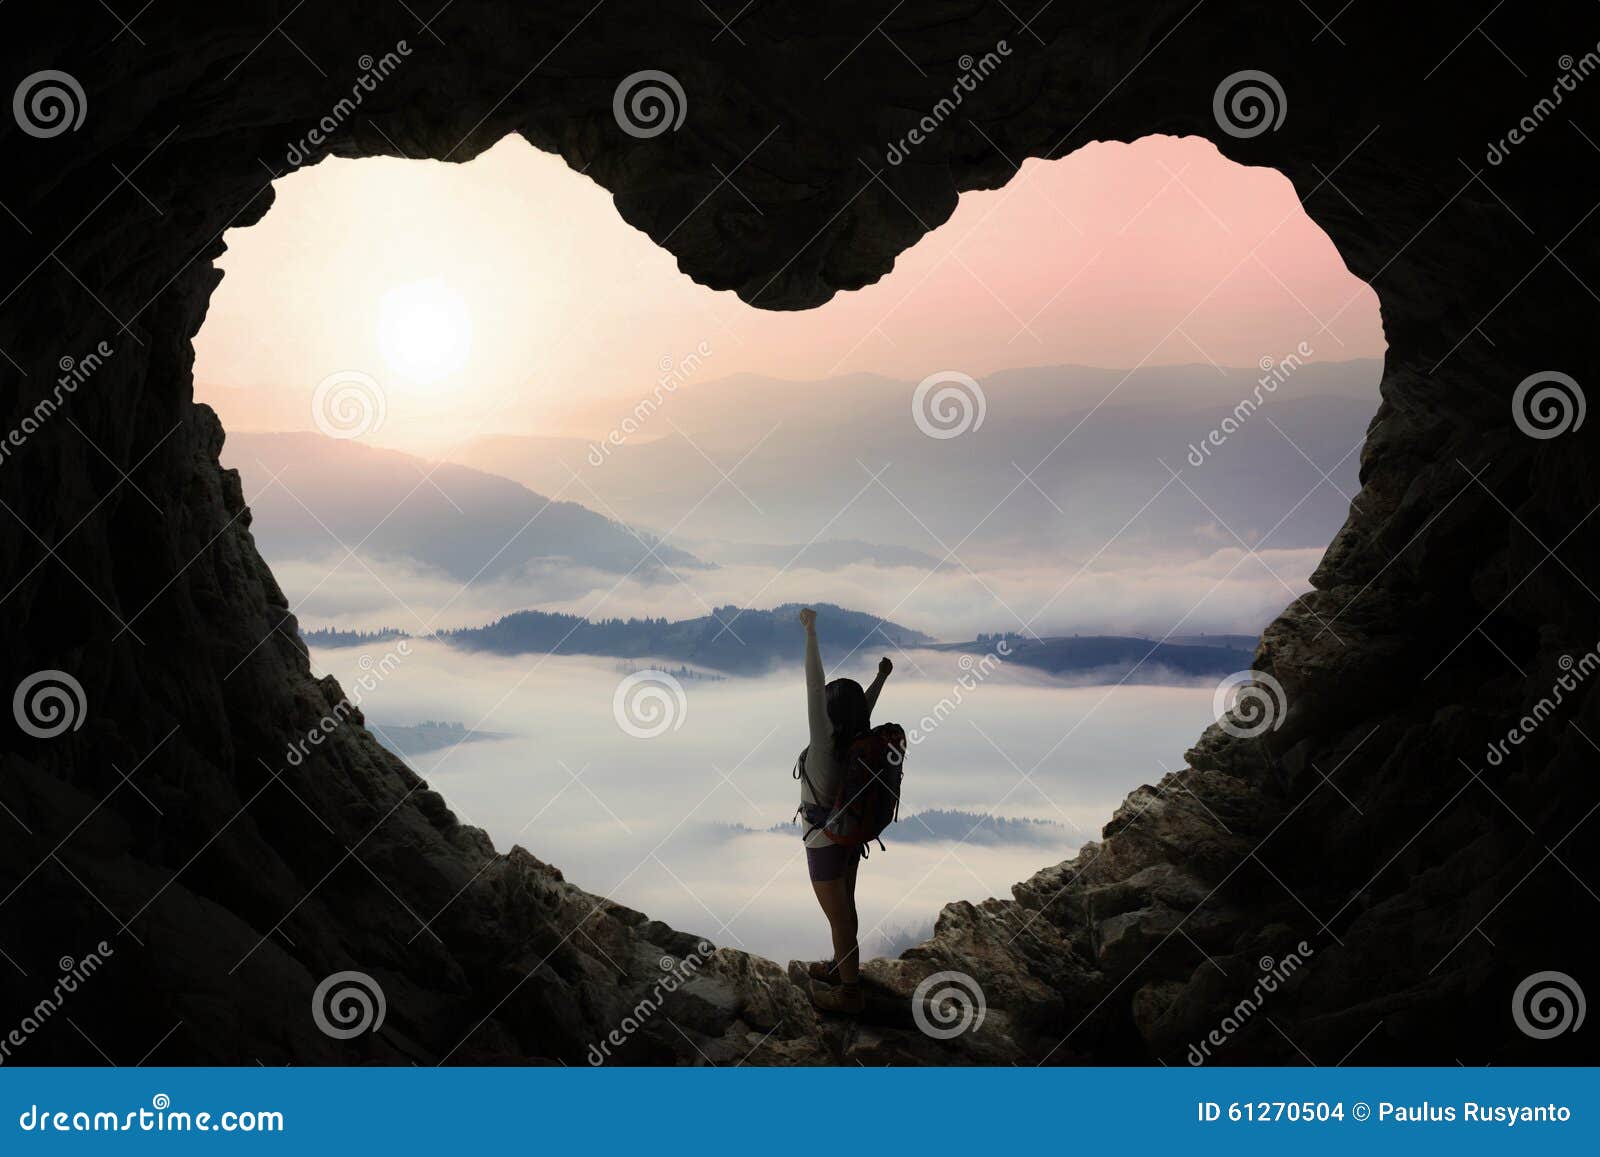 backpacker in cave enjoy mountain view